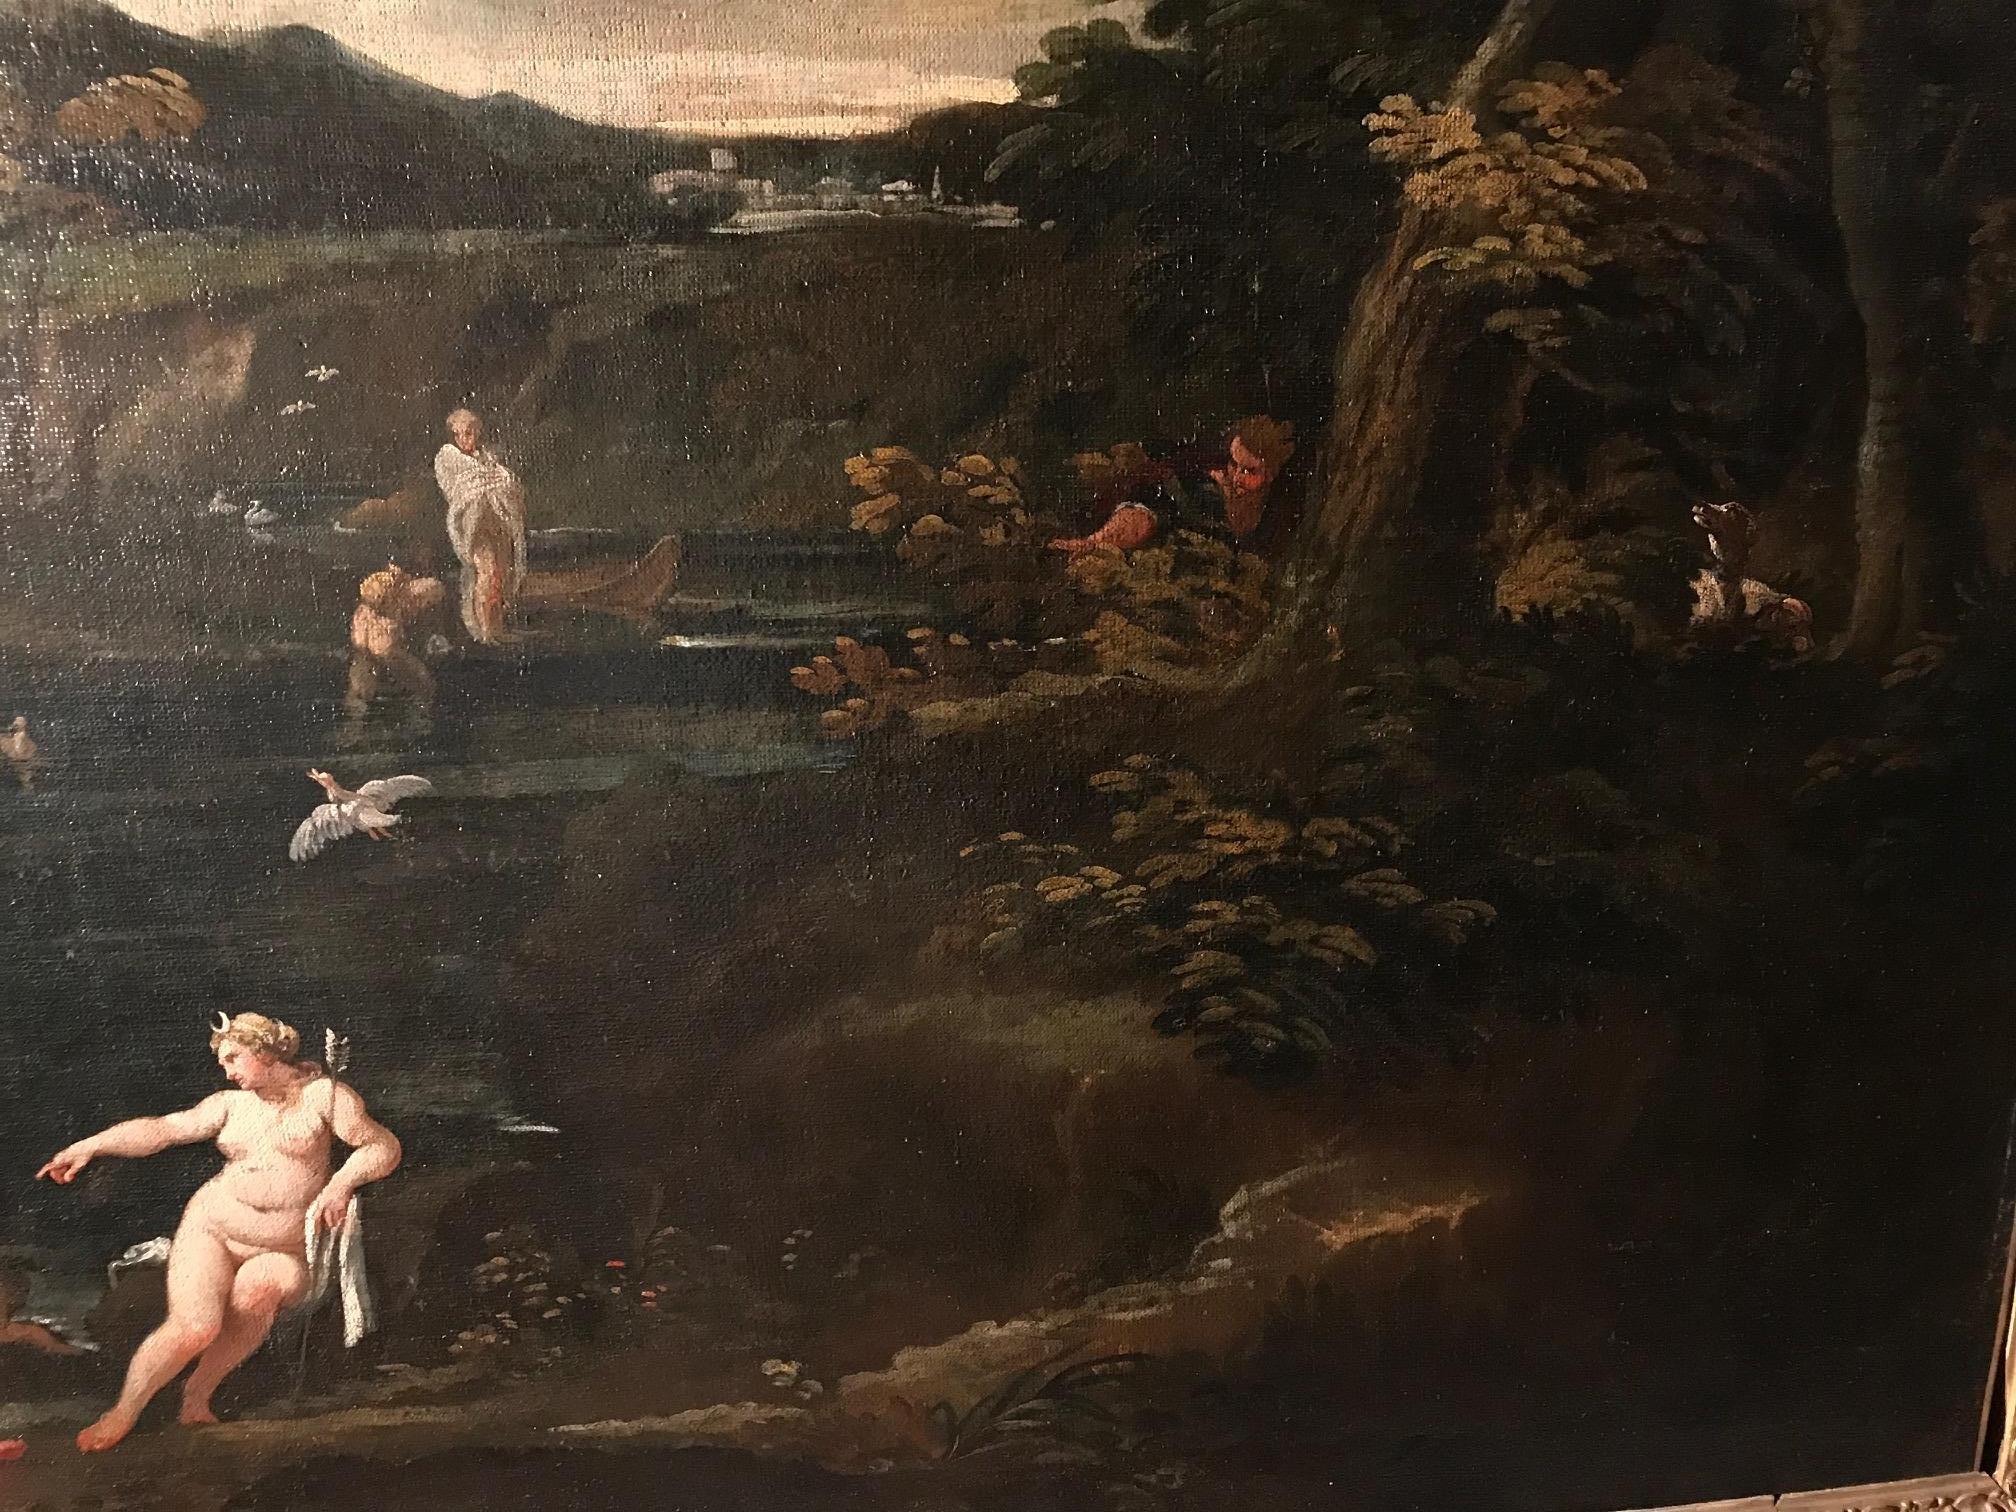 Important 17' Century Mythological Painting Diana and Actaeon Oil on Canvas  - Black Landscape Painting by Giovan Battista Viola